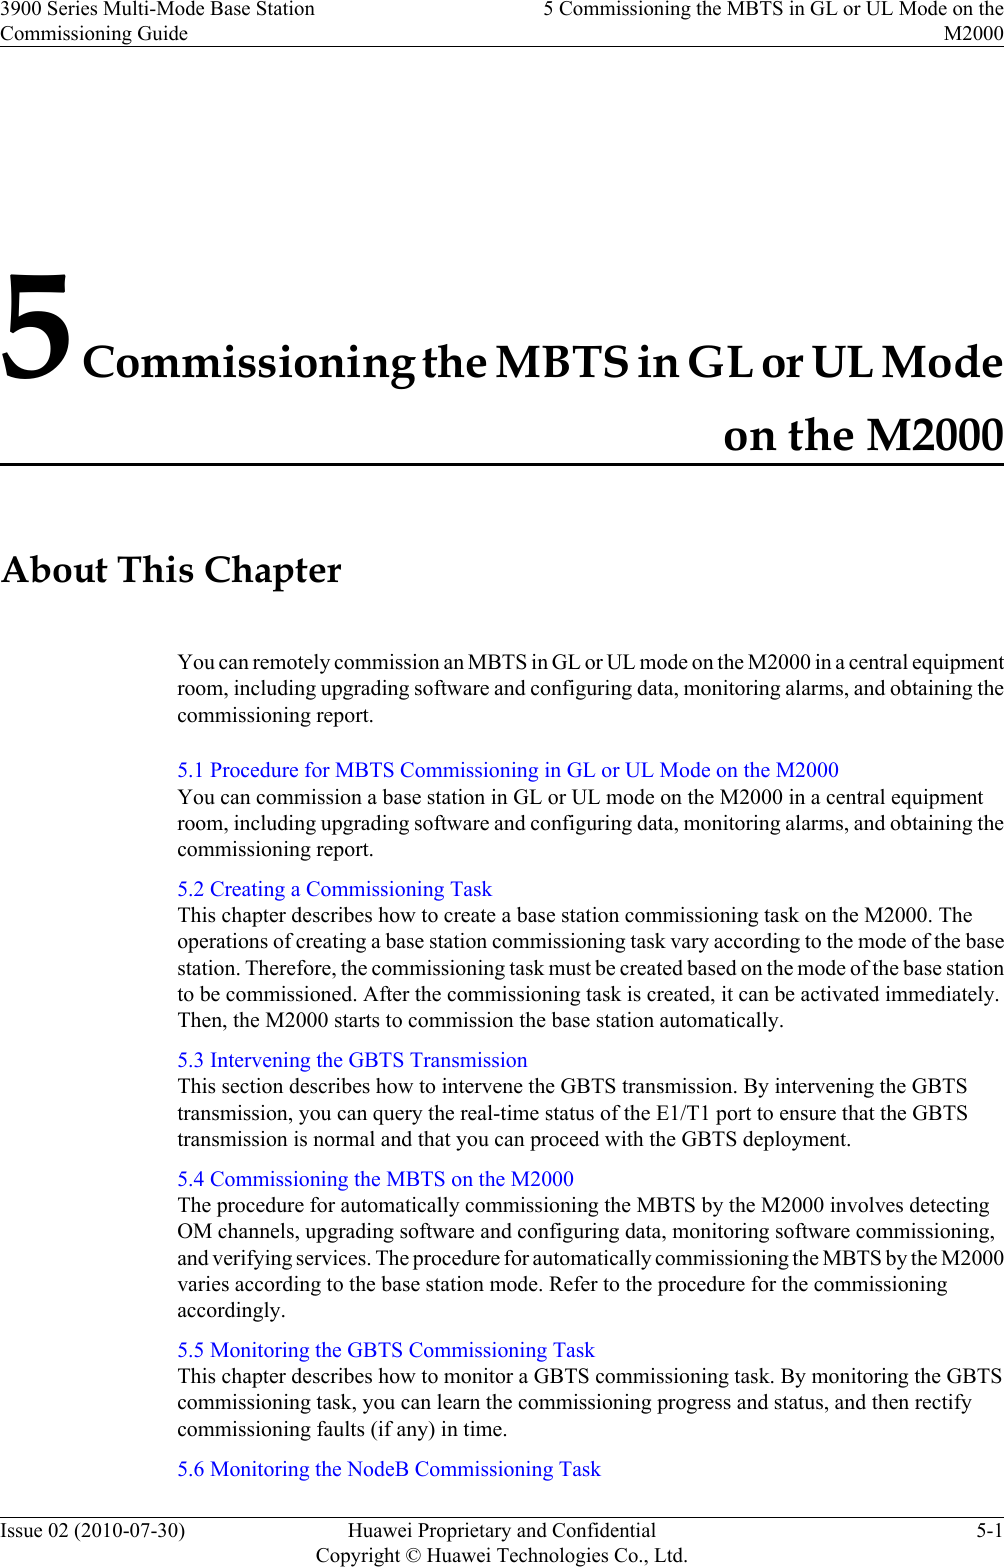 5 Commissioning the MBTS in GL or UL Modeon the M2000About This ChapterYou can remotely commission an MBTS in GL or UL mode on the M2000 in a central equipmentroom, including upgrading software and configuring data, monitoring alarms, and obtaining thecommissioning report.5.1 Procedure for MBTS Commissioning in GL or UL Mode on the M2000You can commission a base station in GL or UL mode on the M2000 in a central equipmentroom, including upgrading software and configuring data, monitoring alarms, and obtaining thecommissioning report.5.2 Creating a Commissioning TaskThis chapter describes how to create a base station commissioning task on the M2000. Theoperations of creating a base station commissioning task vary according to the mode of the basestation. Therefore, the commissioning task must be created based on the mode of the base stationto be commissioned. After the commissioning task is created, it can be activated immediately.Then, the M2000 starts to commission the base station automatically.5.3 Intervening the GBTS TransmissionThis section describes how to intervene the GBTS transmission. By intervening the GBTStransmission, you can query the real-time status of the E1/T1 port to ensure that the GBTStransmission is normal and that you can proceed with the GBTS deployment.5.4 Commissioning the MBTS on the M2000The procedure for automatically commissioning the MBTS by the M2000 involves detectingOM channels, upgrading software and configuring data, monitoring software commissioning,and verifying services. The procedure for automatically commissioning the MBTS by the M2000varies according to the base station mode. Refer to the procedure for the commissioningaccordingly.5.5 Monitoring the GBTS Commissioning TaskThis chapter describes how to monitor a GBTS commissioning task. By monitoring the GBTScommissioning task, you can learn the commissioning progress and status, and then rectifycommissioning faults (if any) in time.5.6 Monitoring the NodeB Commissioning Task3900 Series Multi-Mode Base StationCommissioning Guide5 Commissioning the MBTS in GL or UL Mode on theM2000Issue 02 (2010-07-30) Huawei Proprietary and ConfidentialCopyright © Huawei Technologies Co., Ltd.5-1